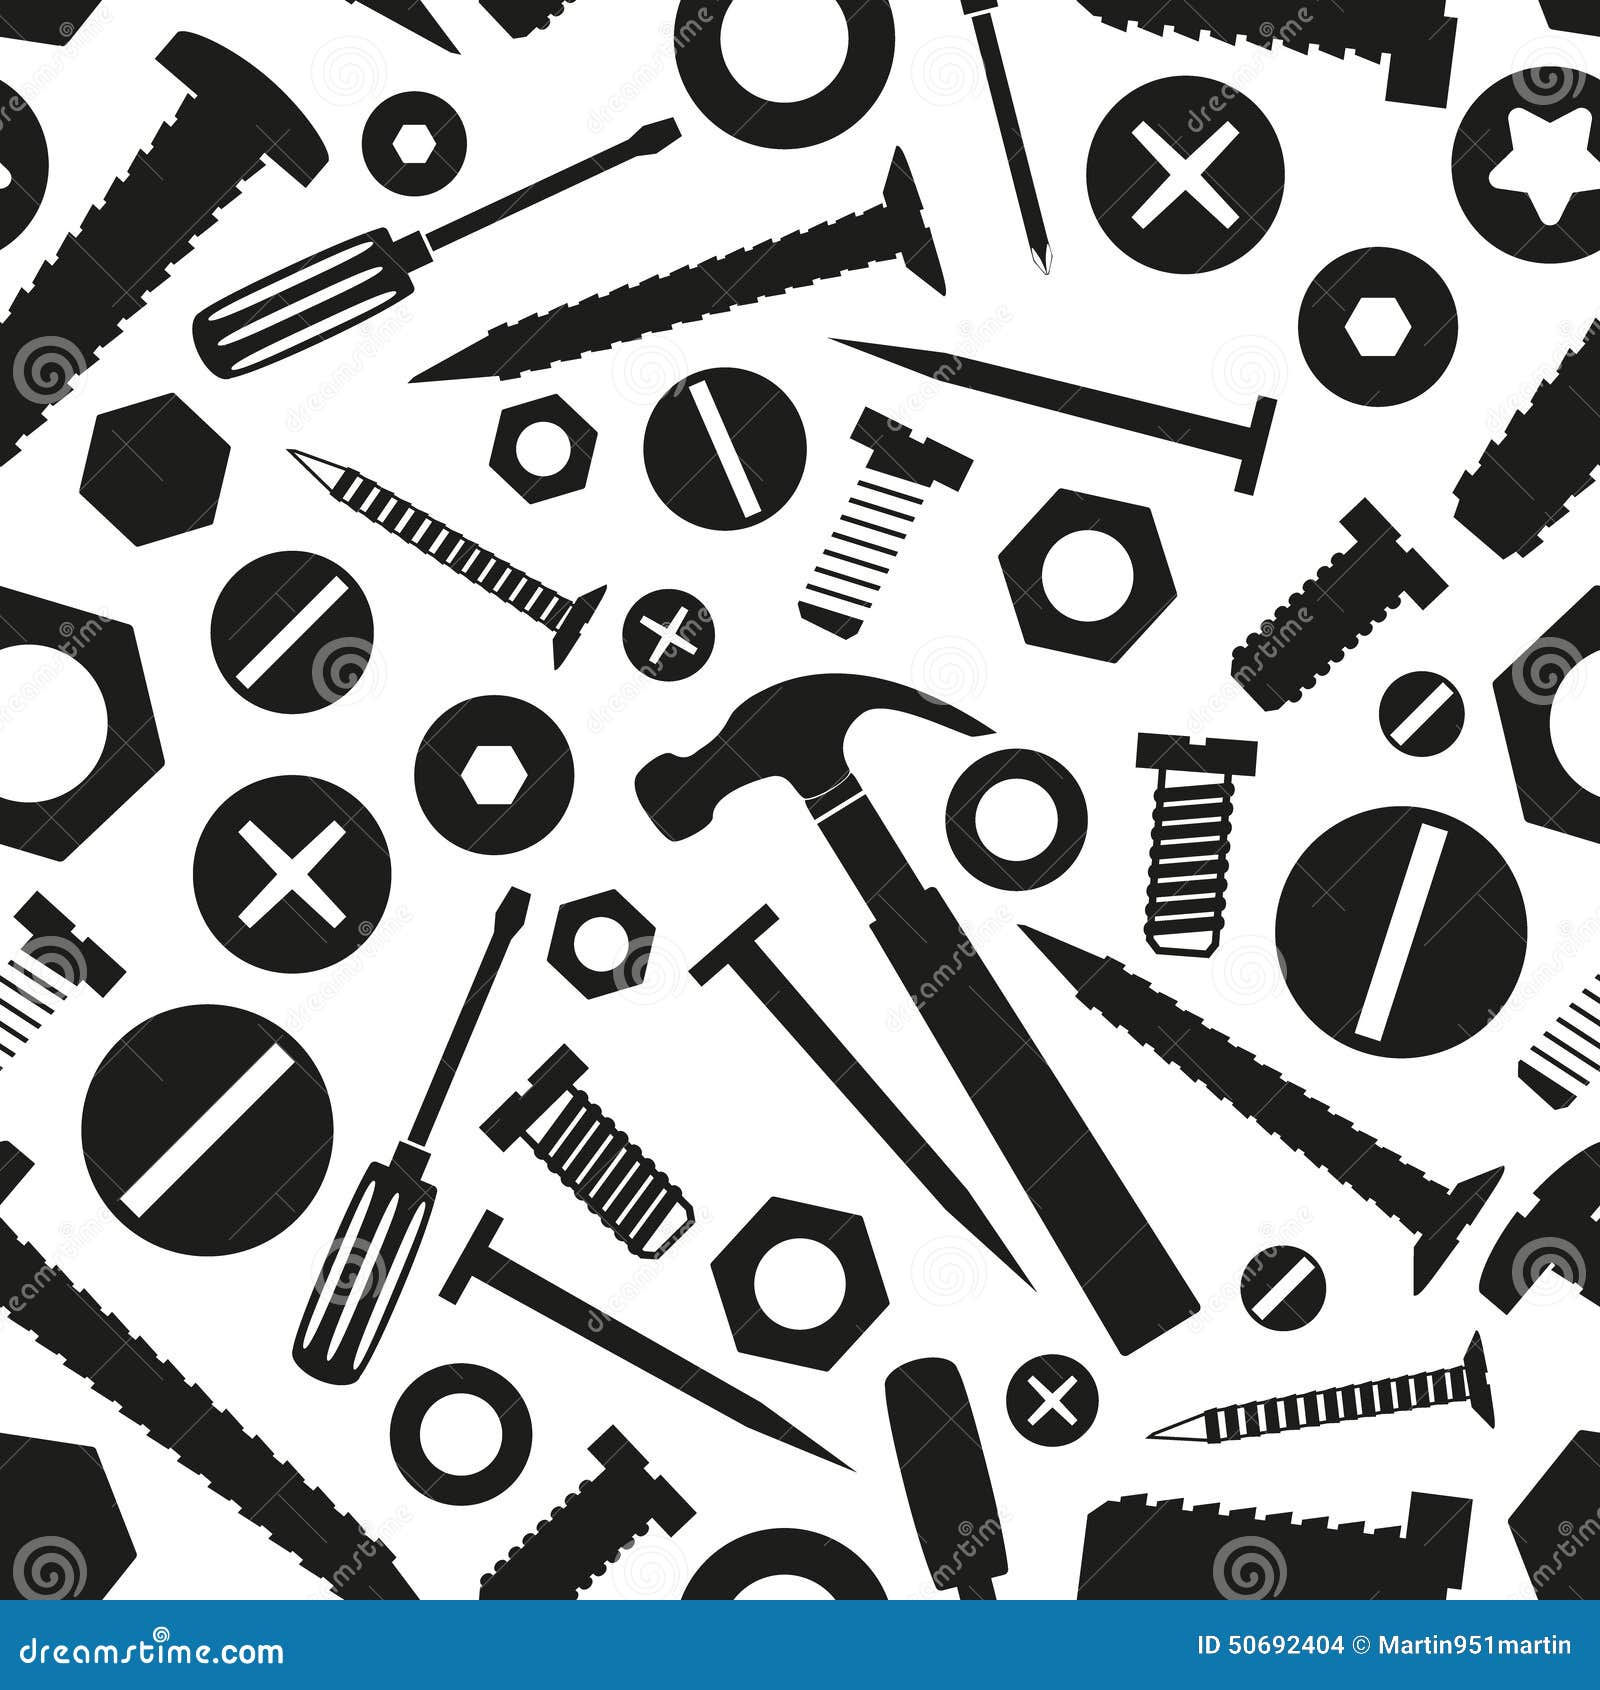 hardware screws and nails with tools seamless pattern